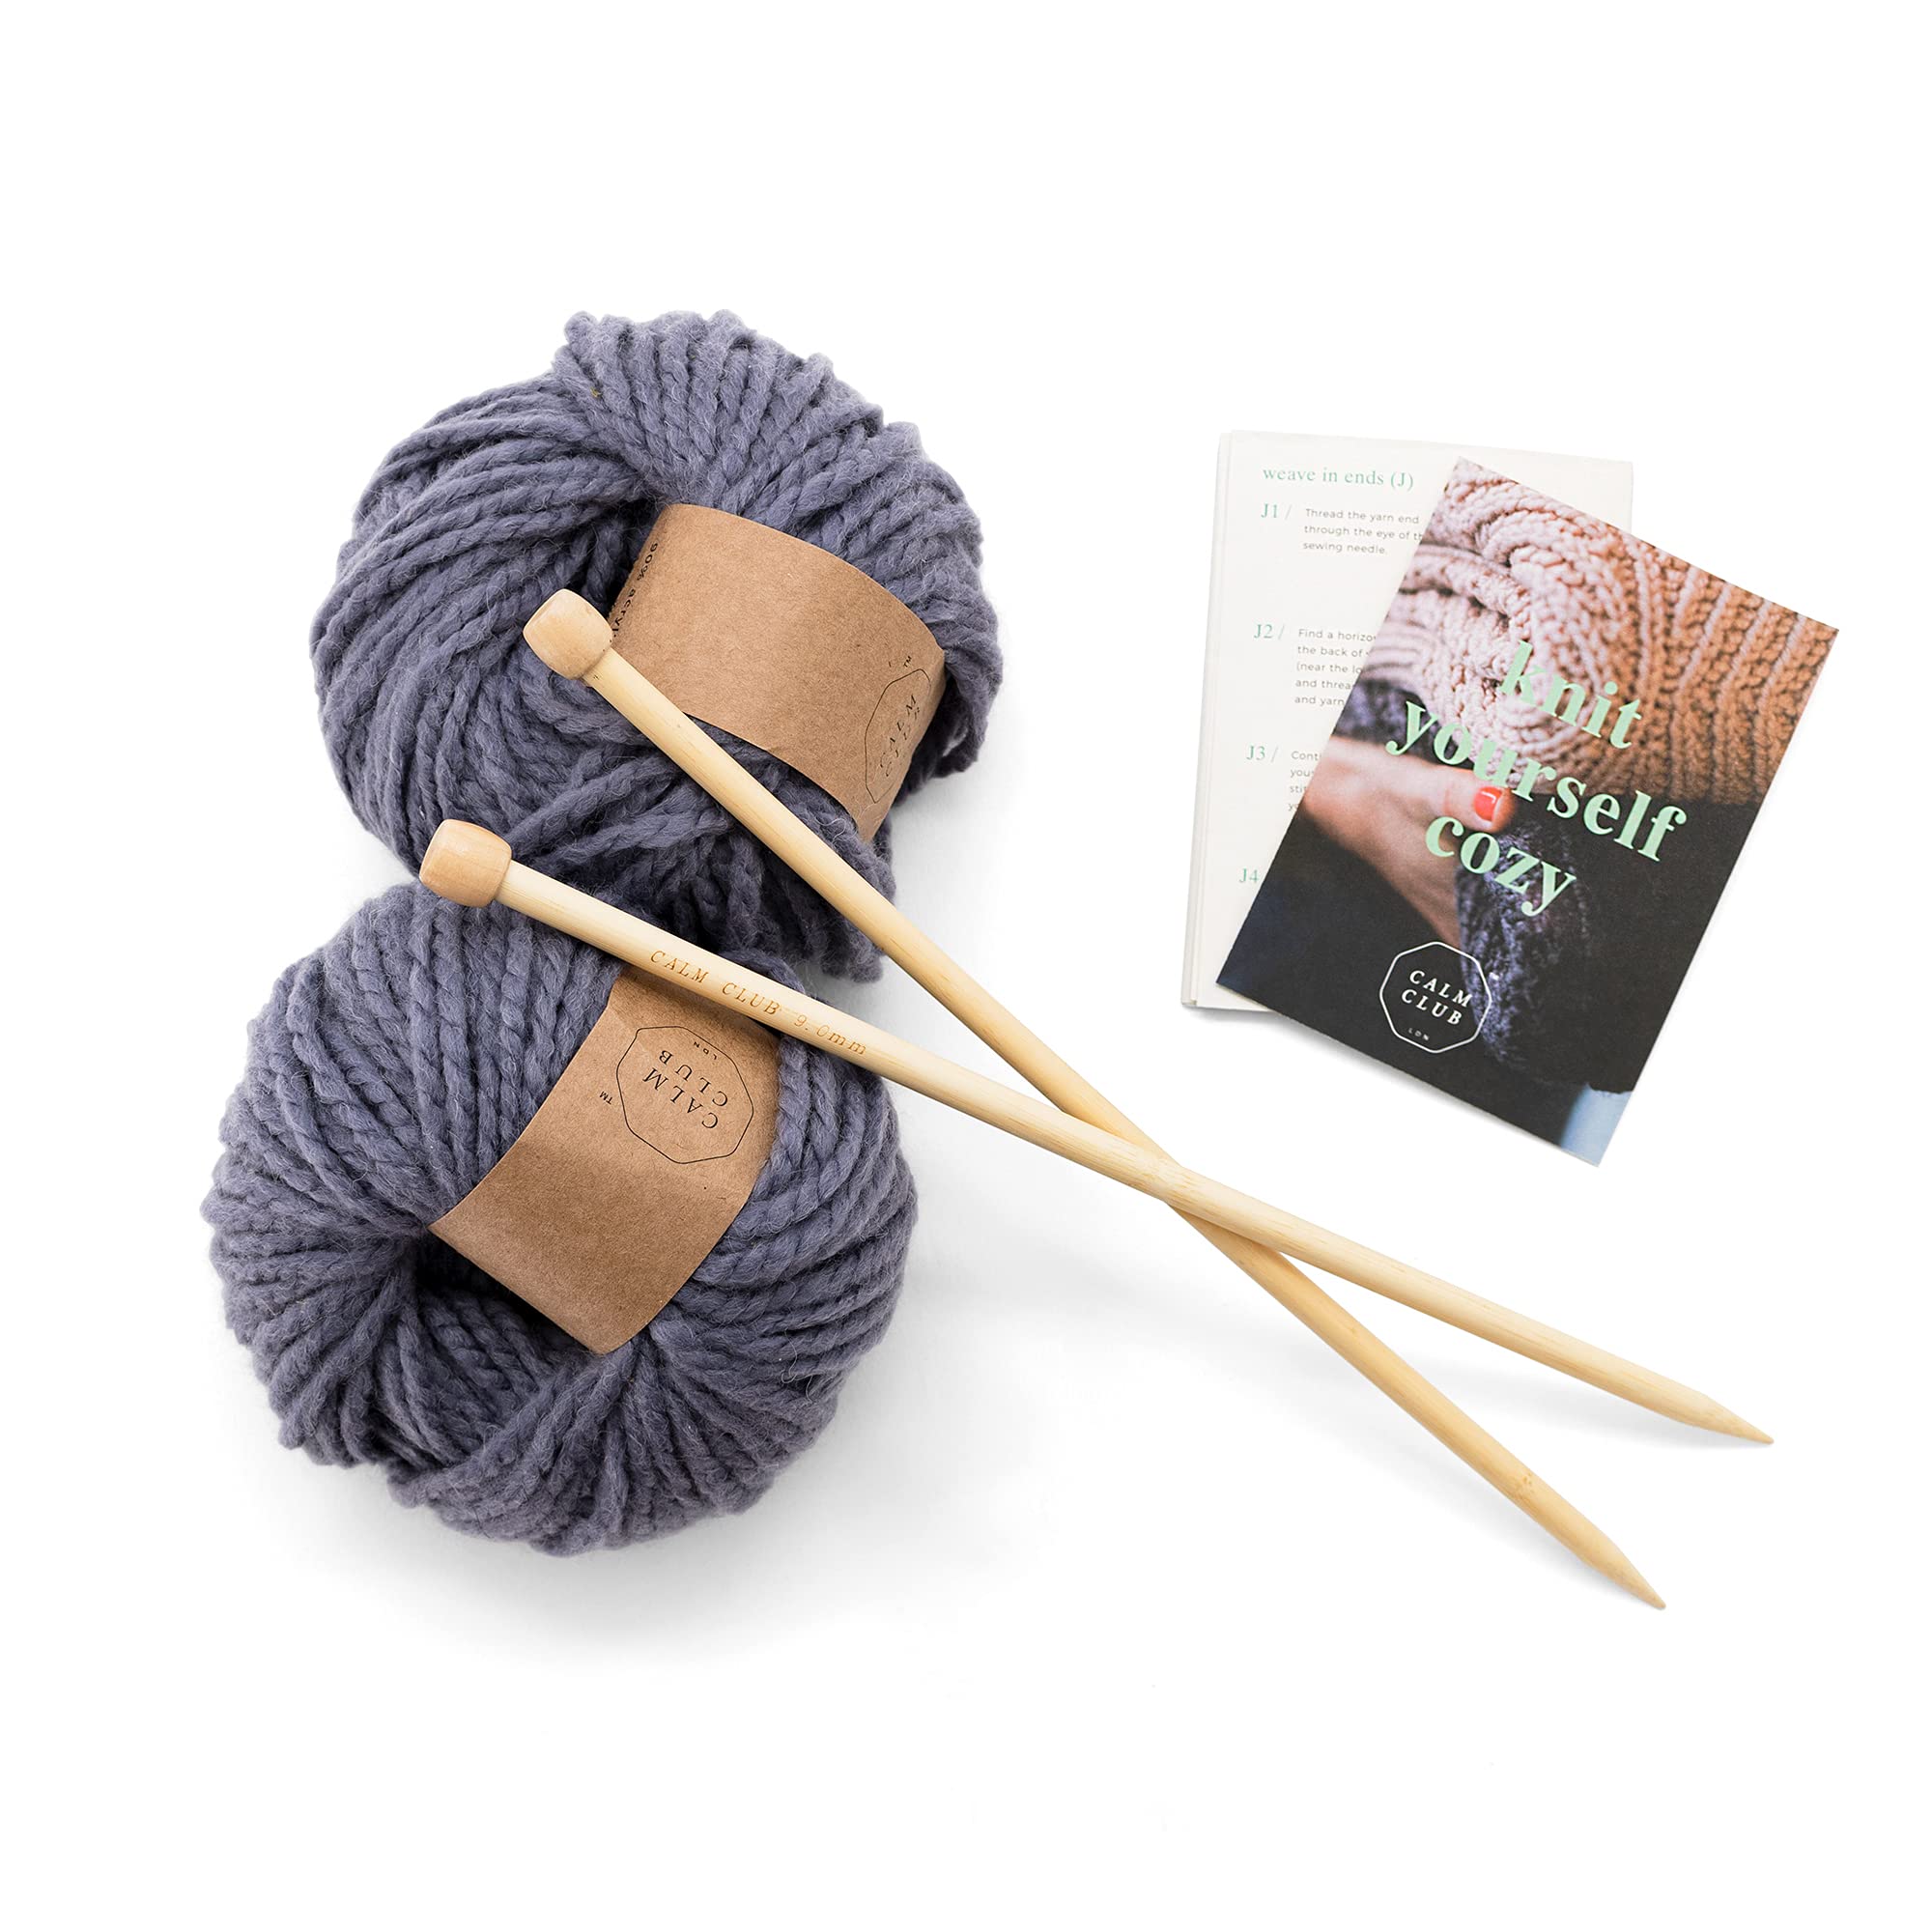 BEGINNER'S SEWING AND KNITTING KIT